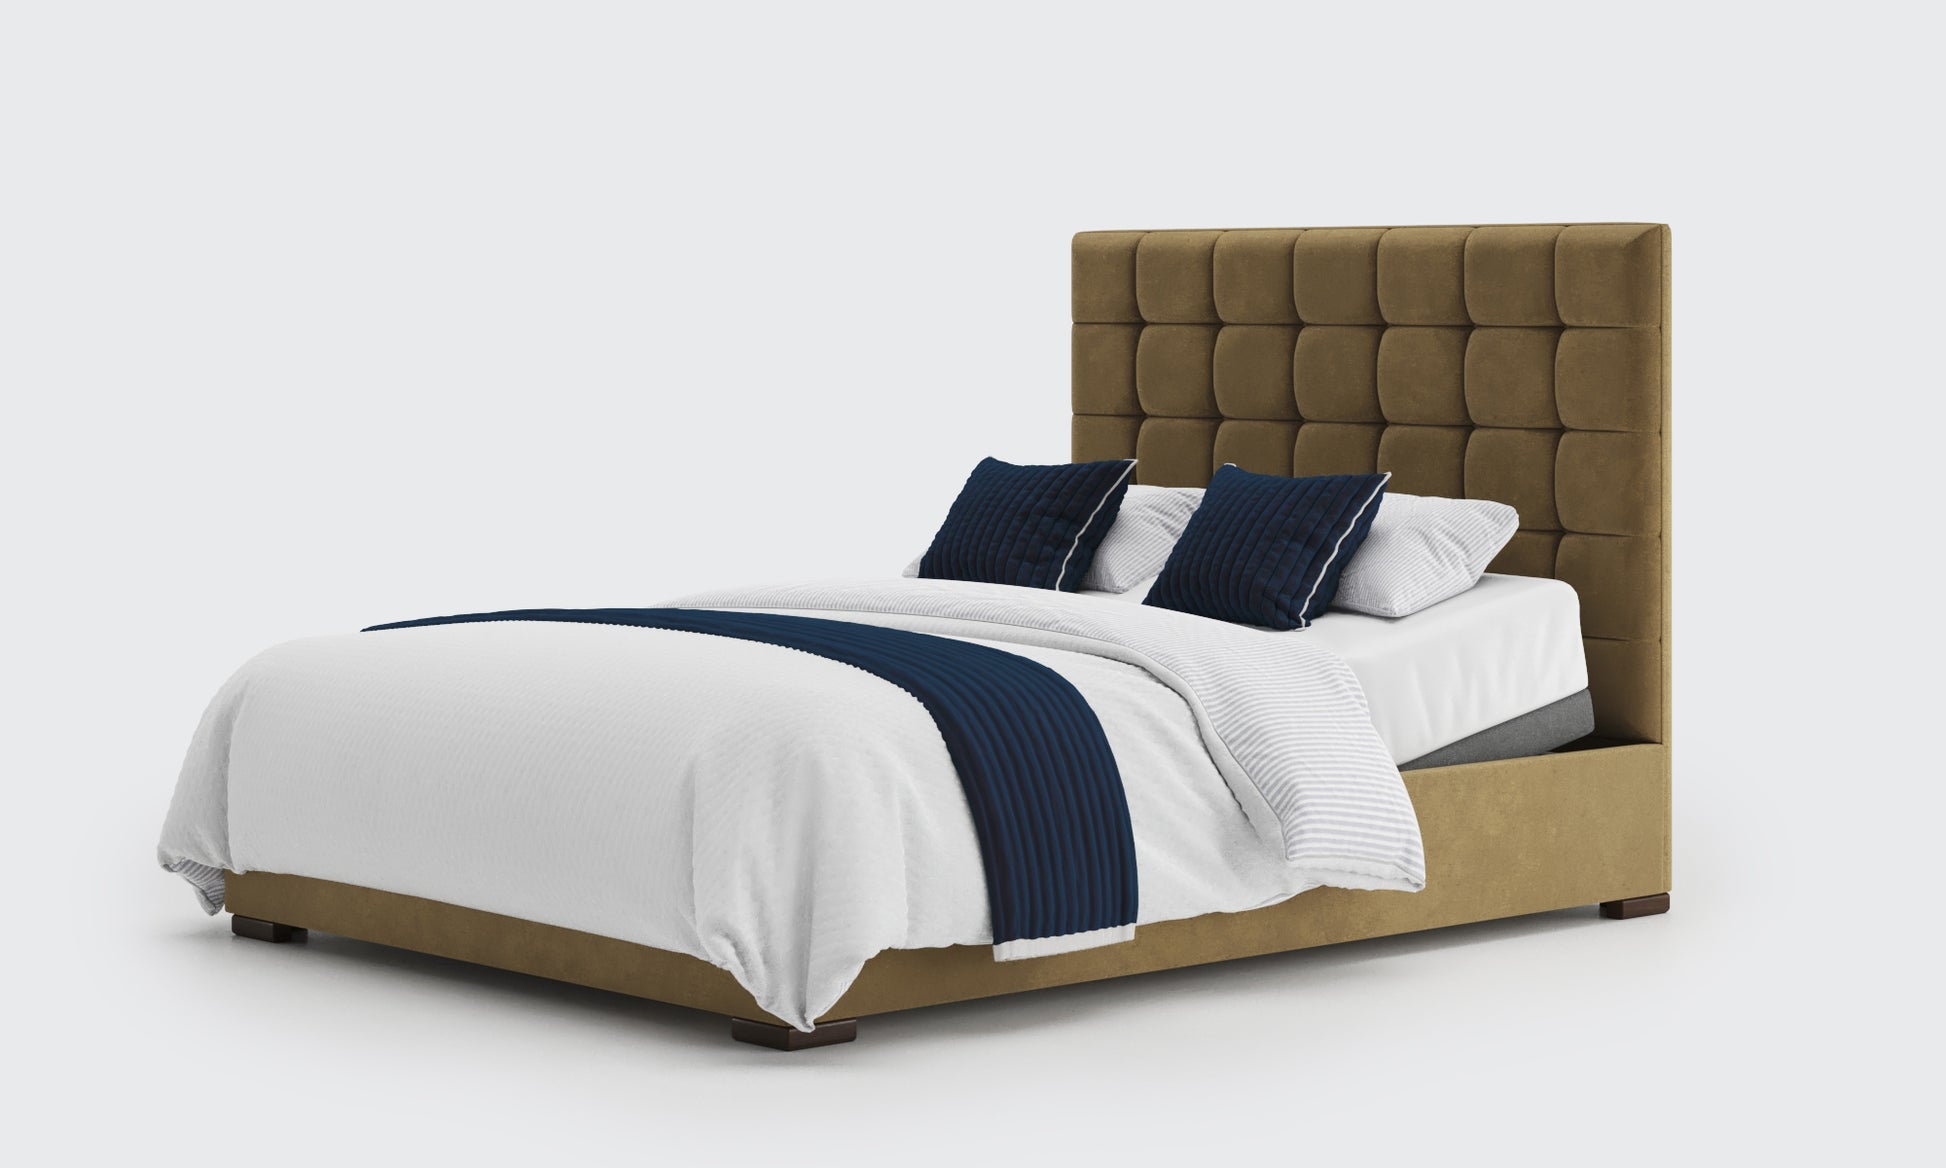 stratton 5ft double bed and mattress in the biscuit velvet material